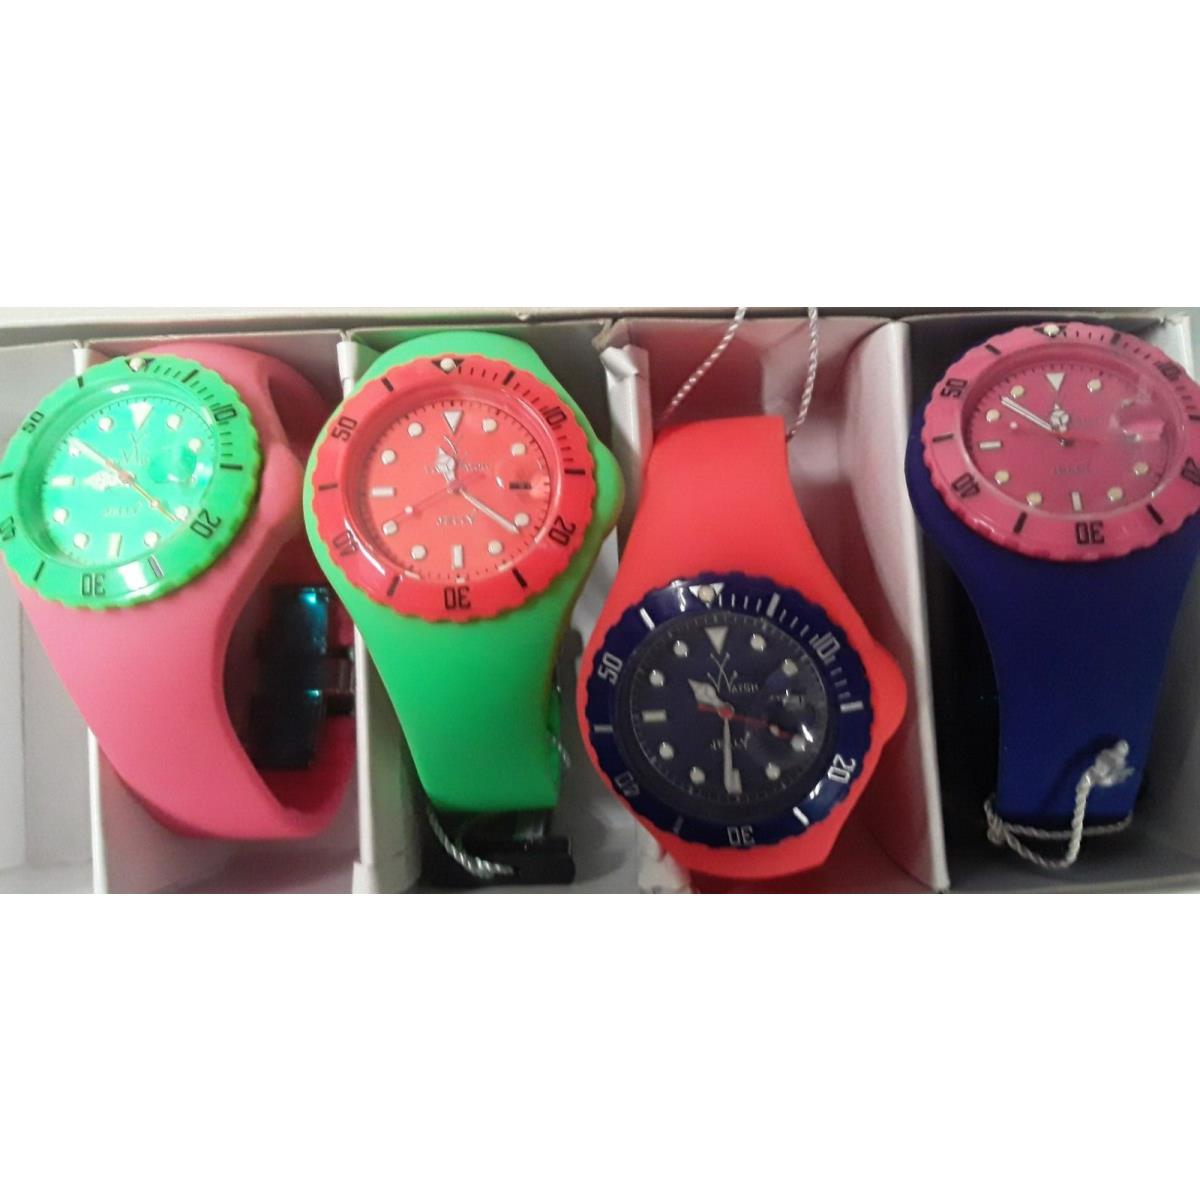 Lot of 4 Color Jelly Toywatch with Interchangeable Dials